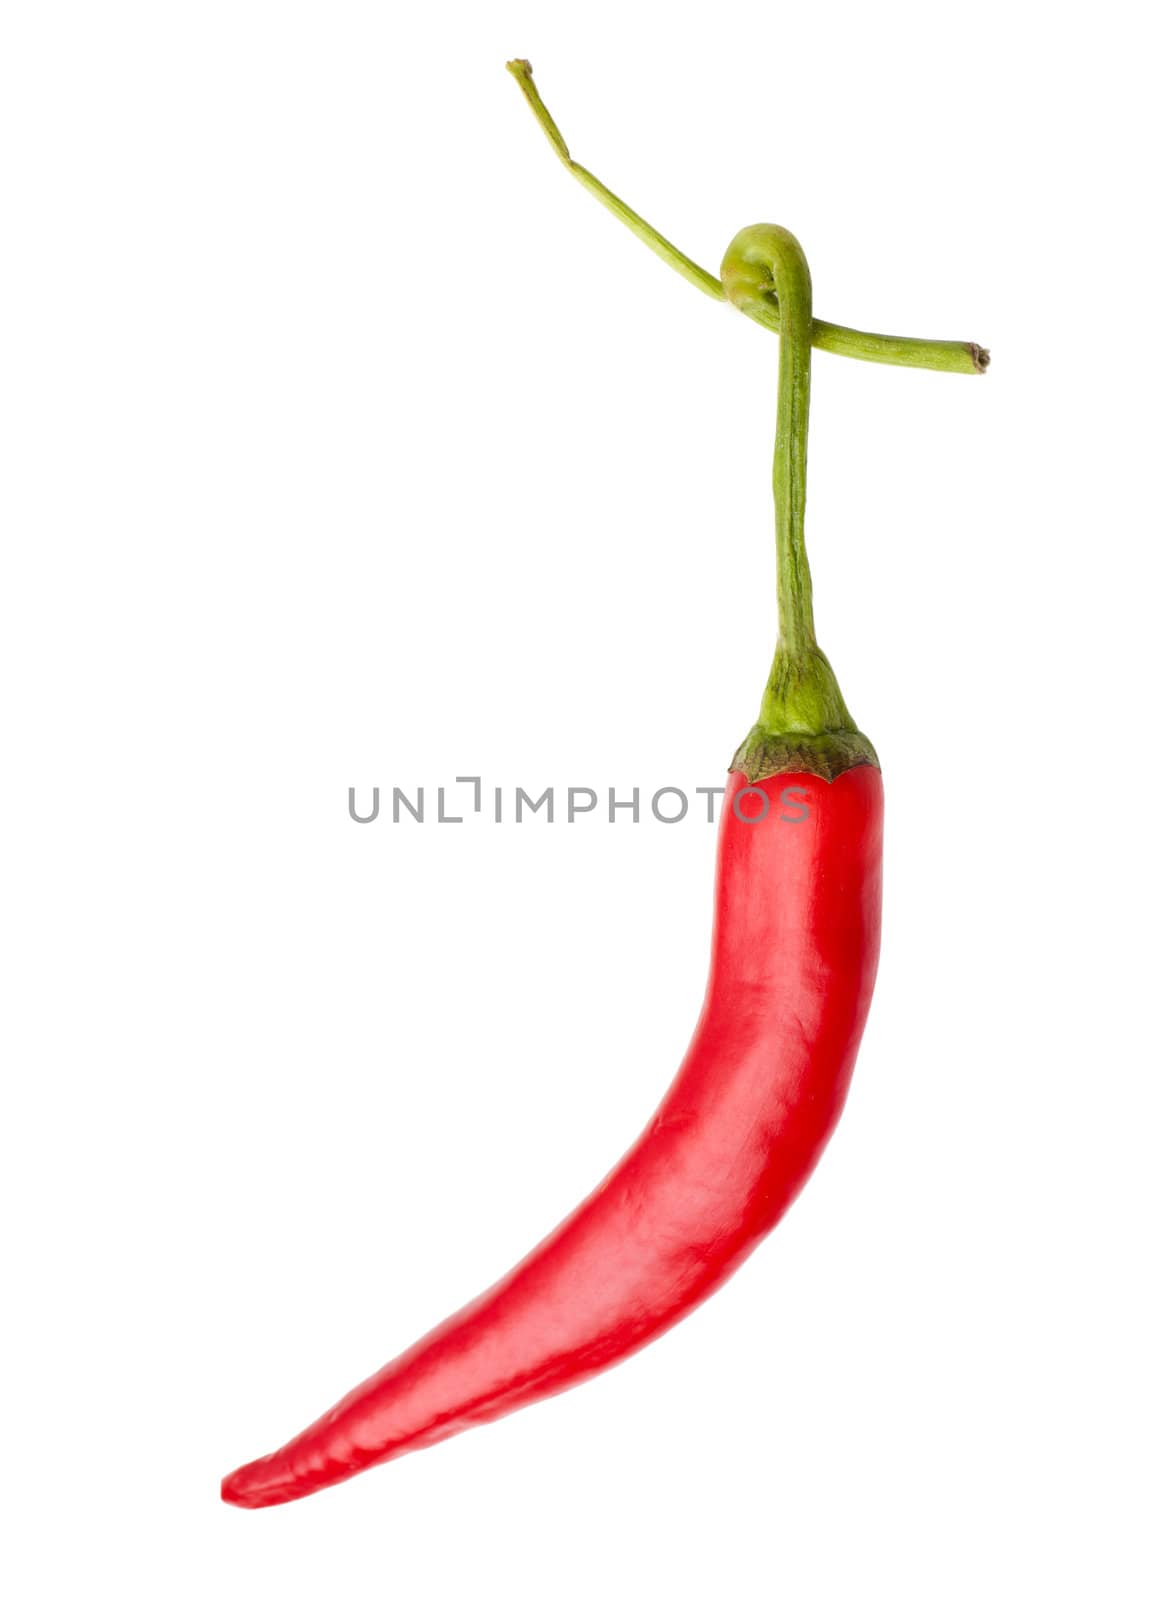 Red chili pepper by AGorohov